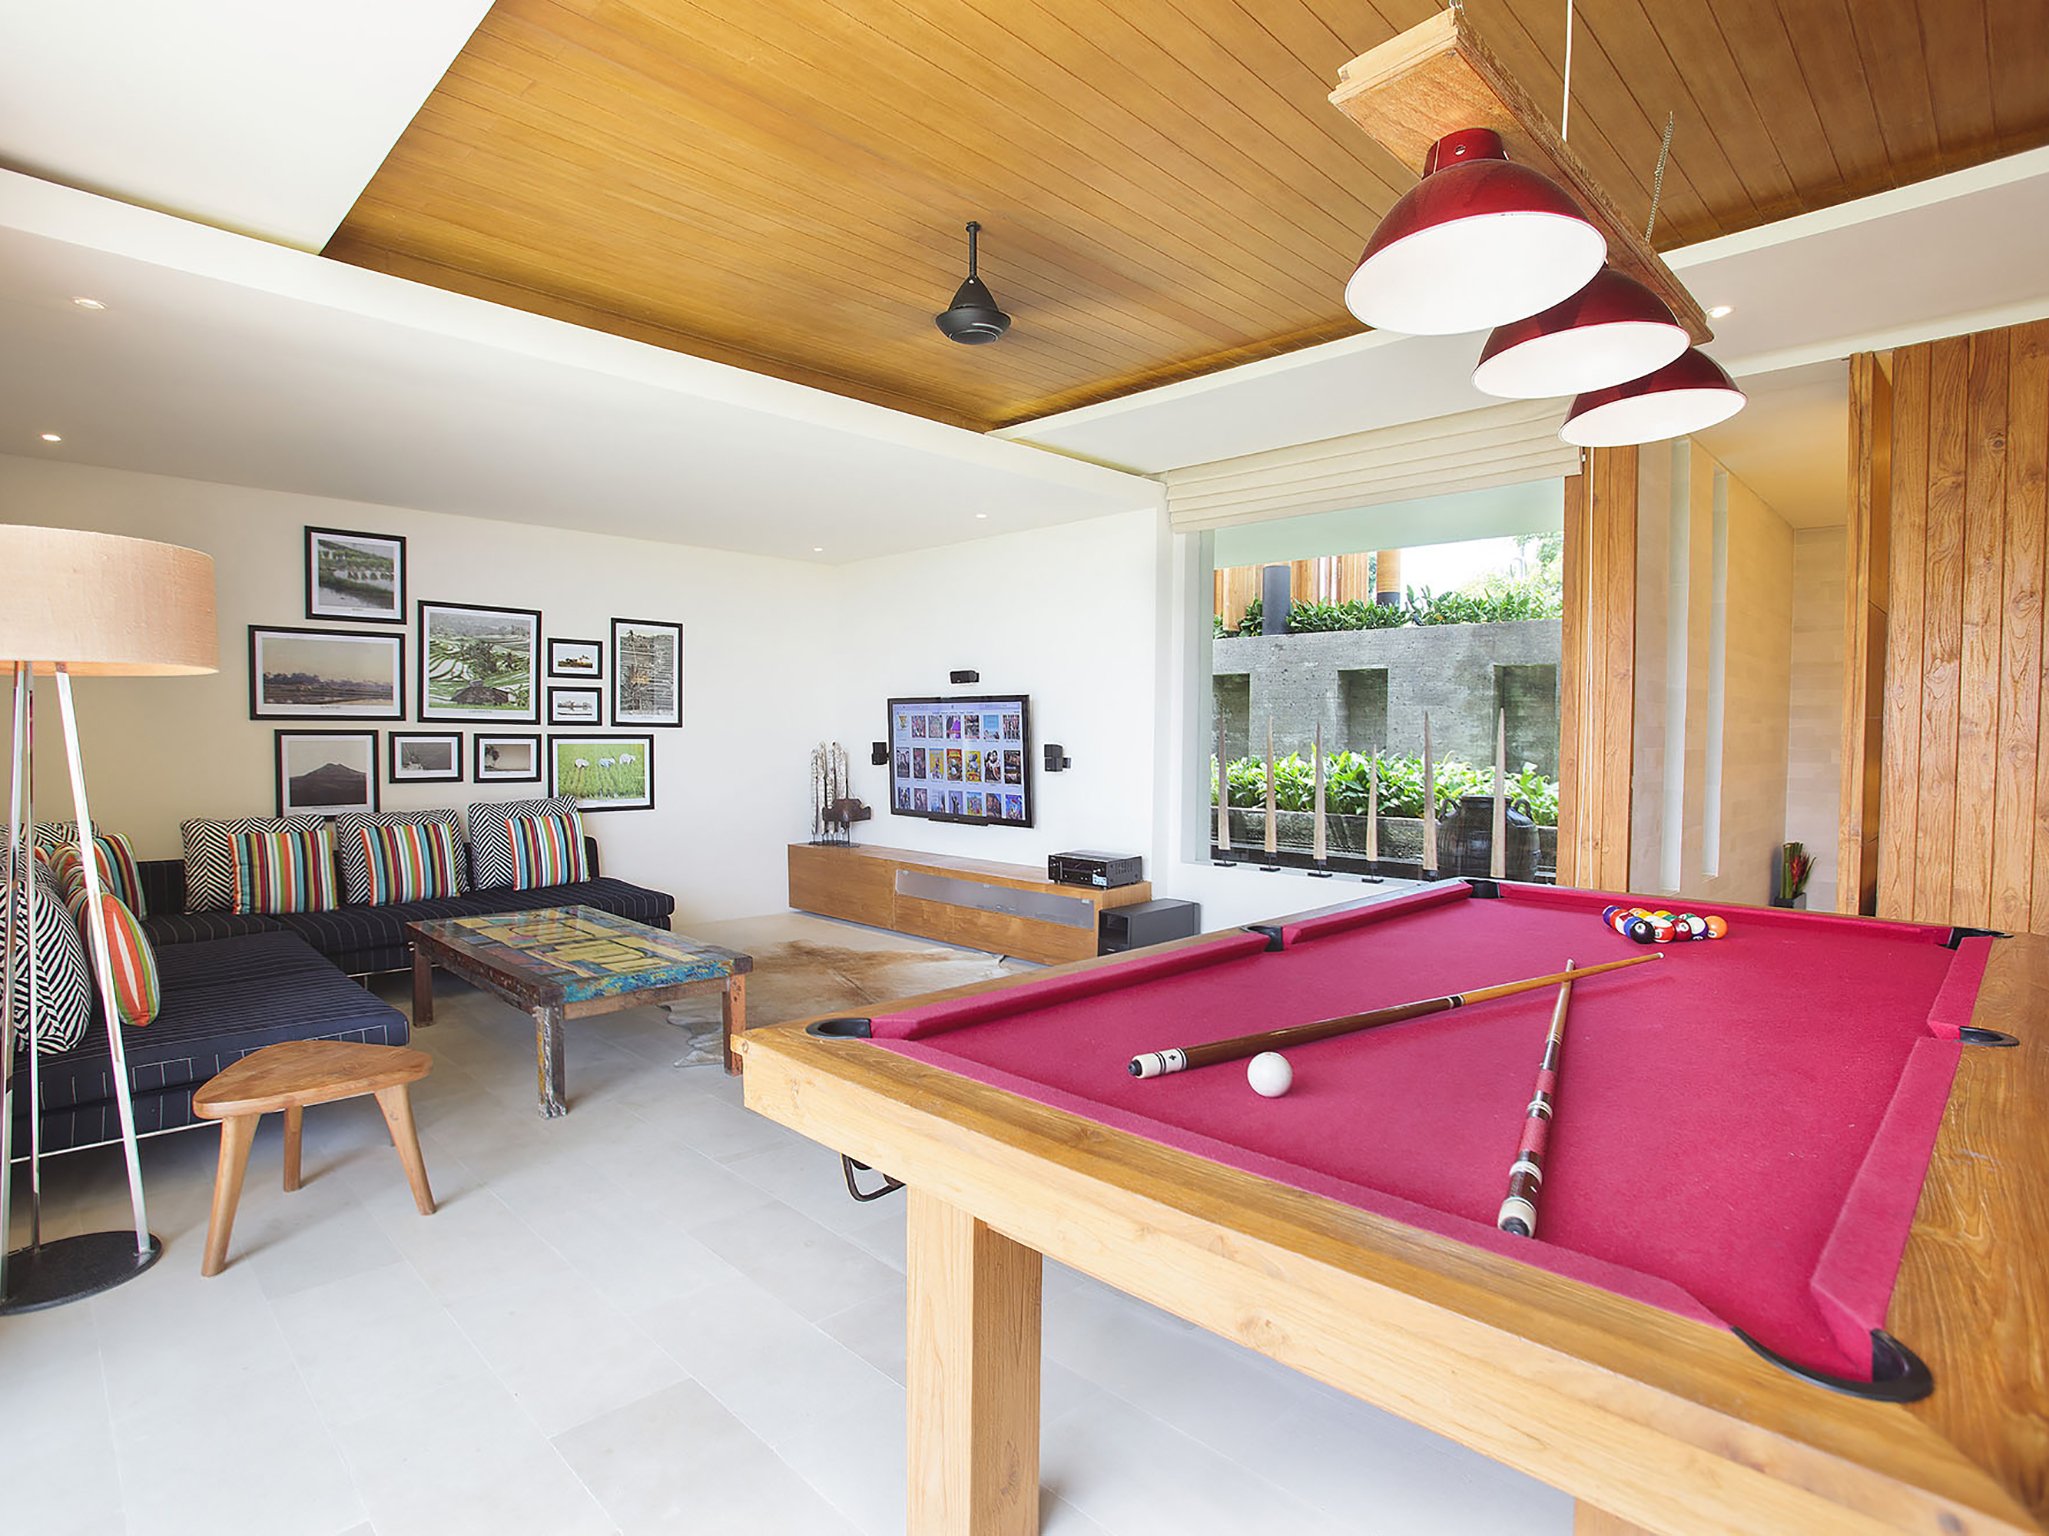 Family-Friendly Features, Image from The Iman Villa website